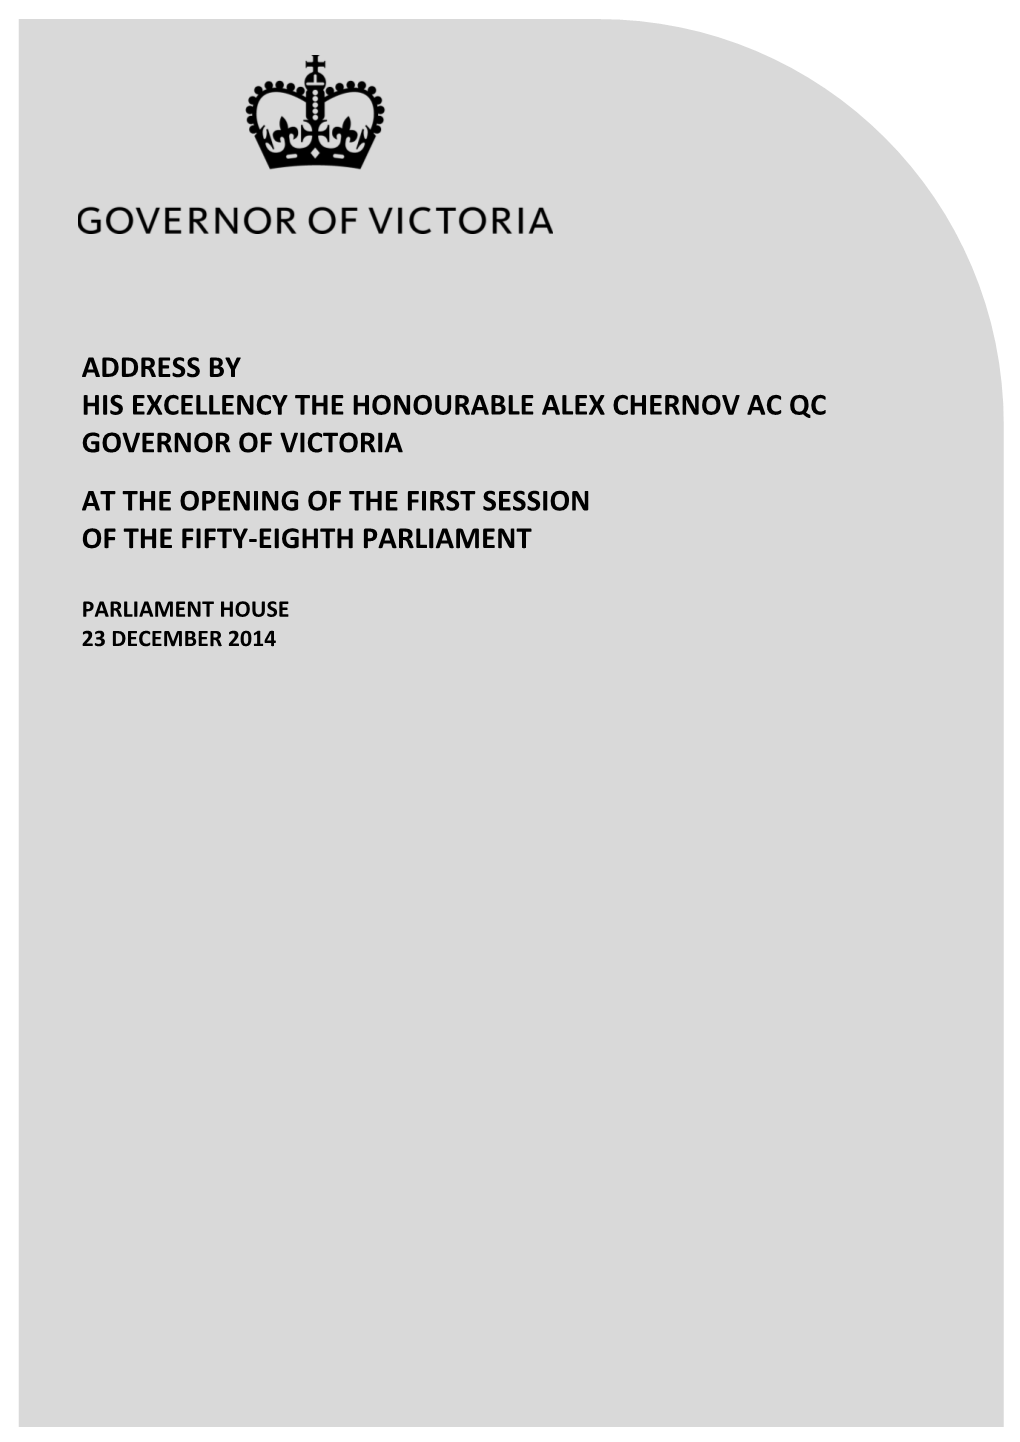 Address by His Excellency the Honourable Alex Chernov Ac Qc Governor of Victoria at the Opening of the First Session of the Fifty-Eighth Parliament